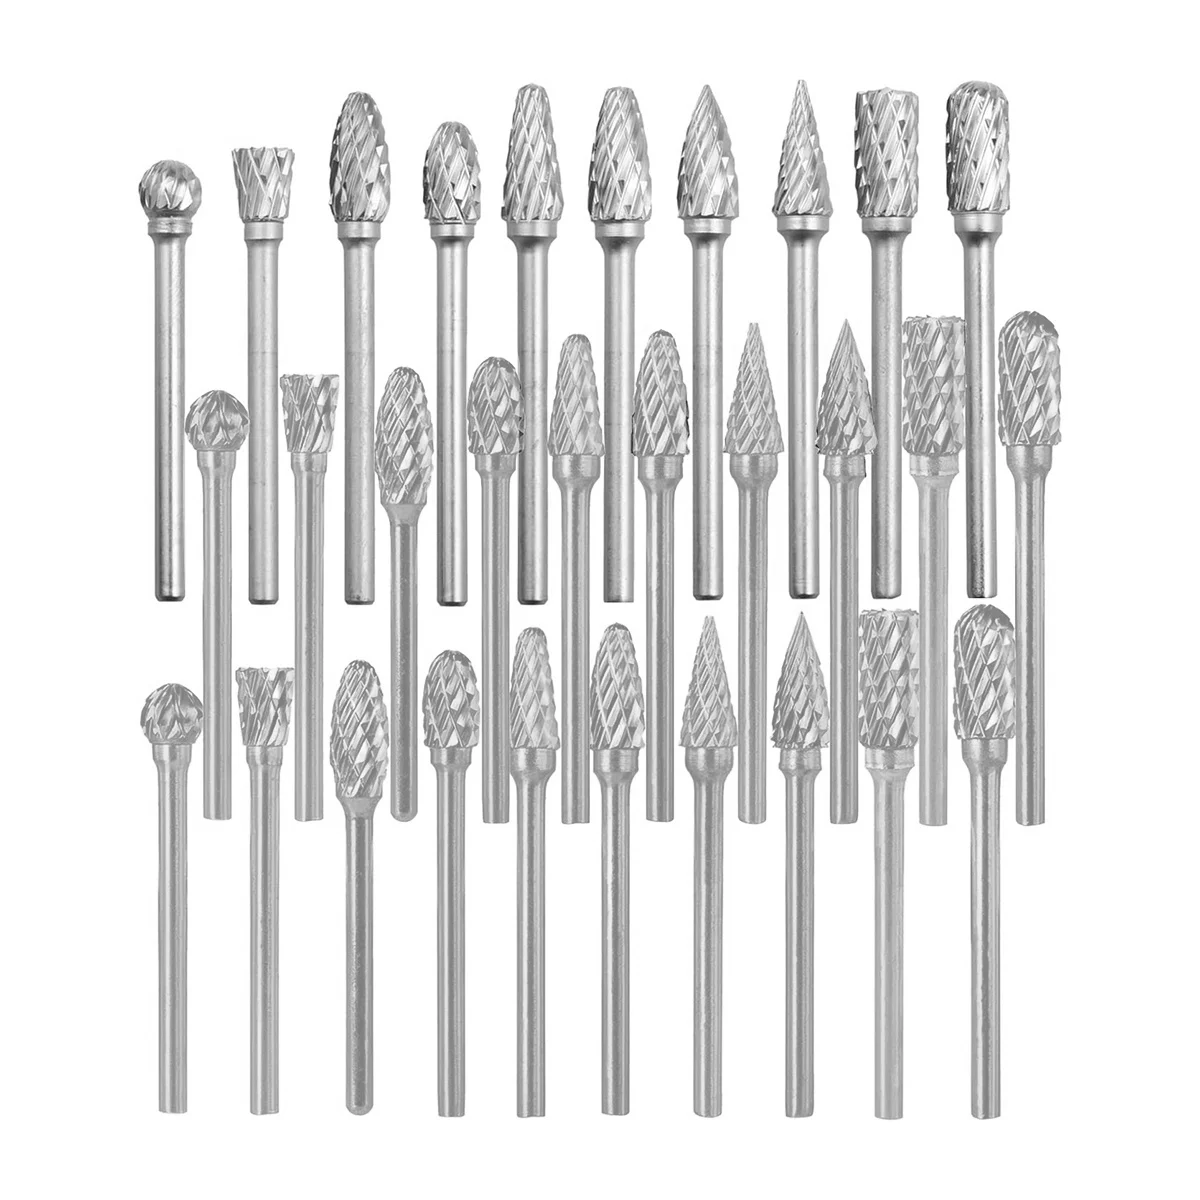 

30 Pcs Double Cut Titanium Carbide Rotary Burr Set - 1/8 Inch (3mm) Handle and 1/4 Inch (6mm) Head Size Tungsten Carbide